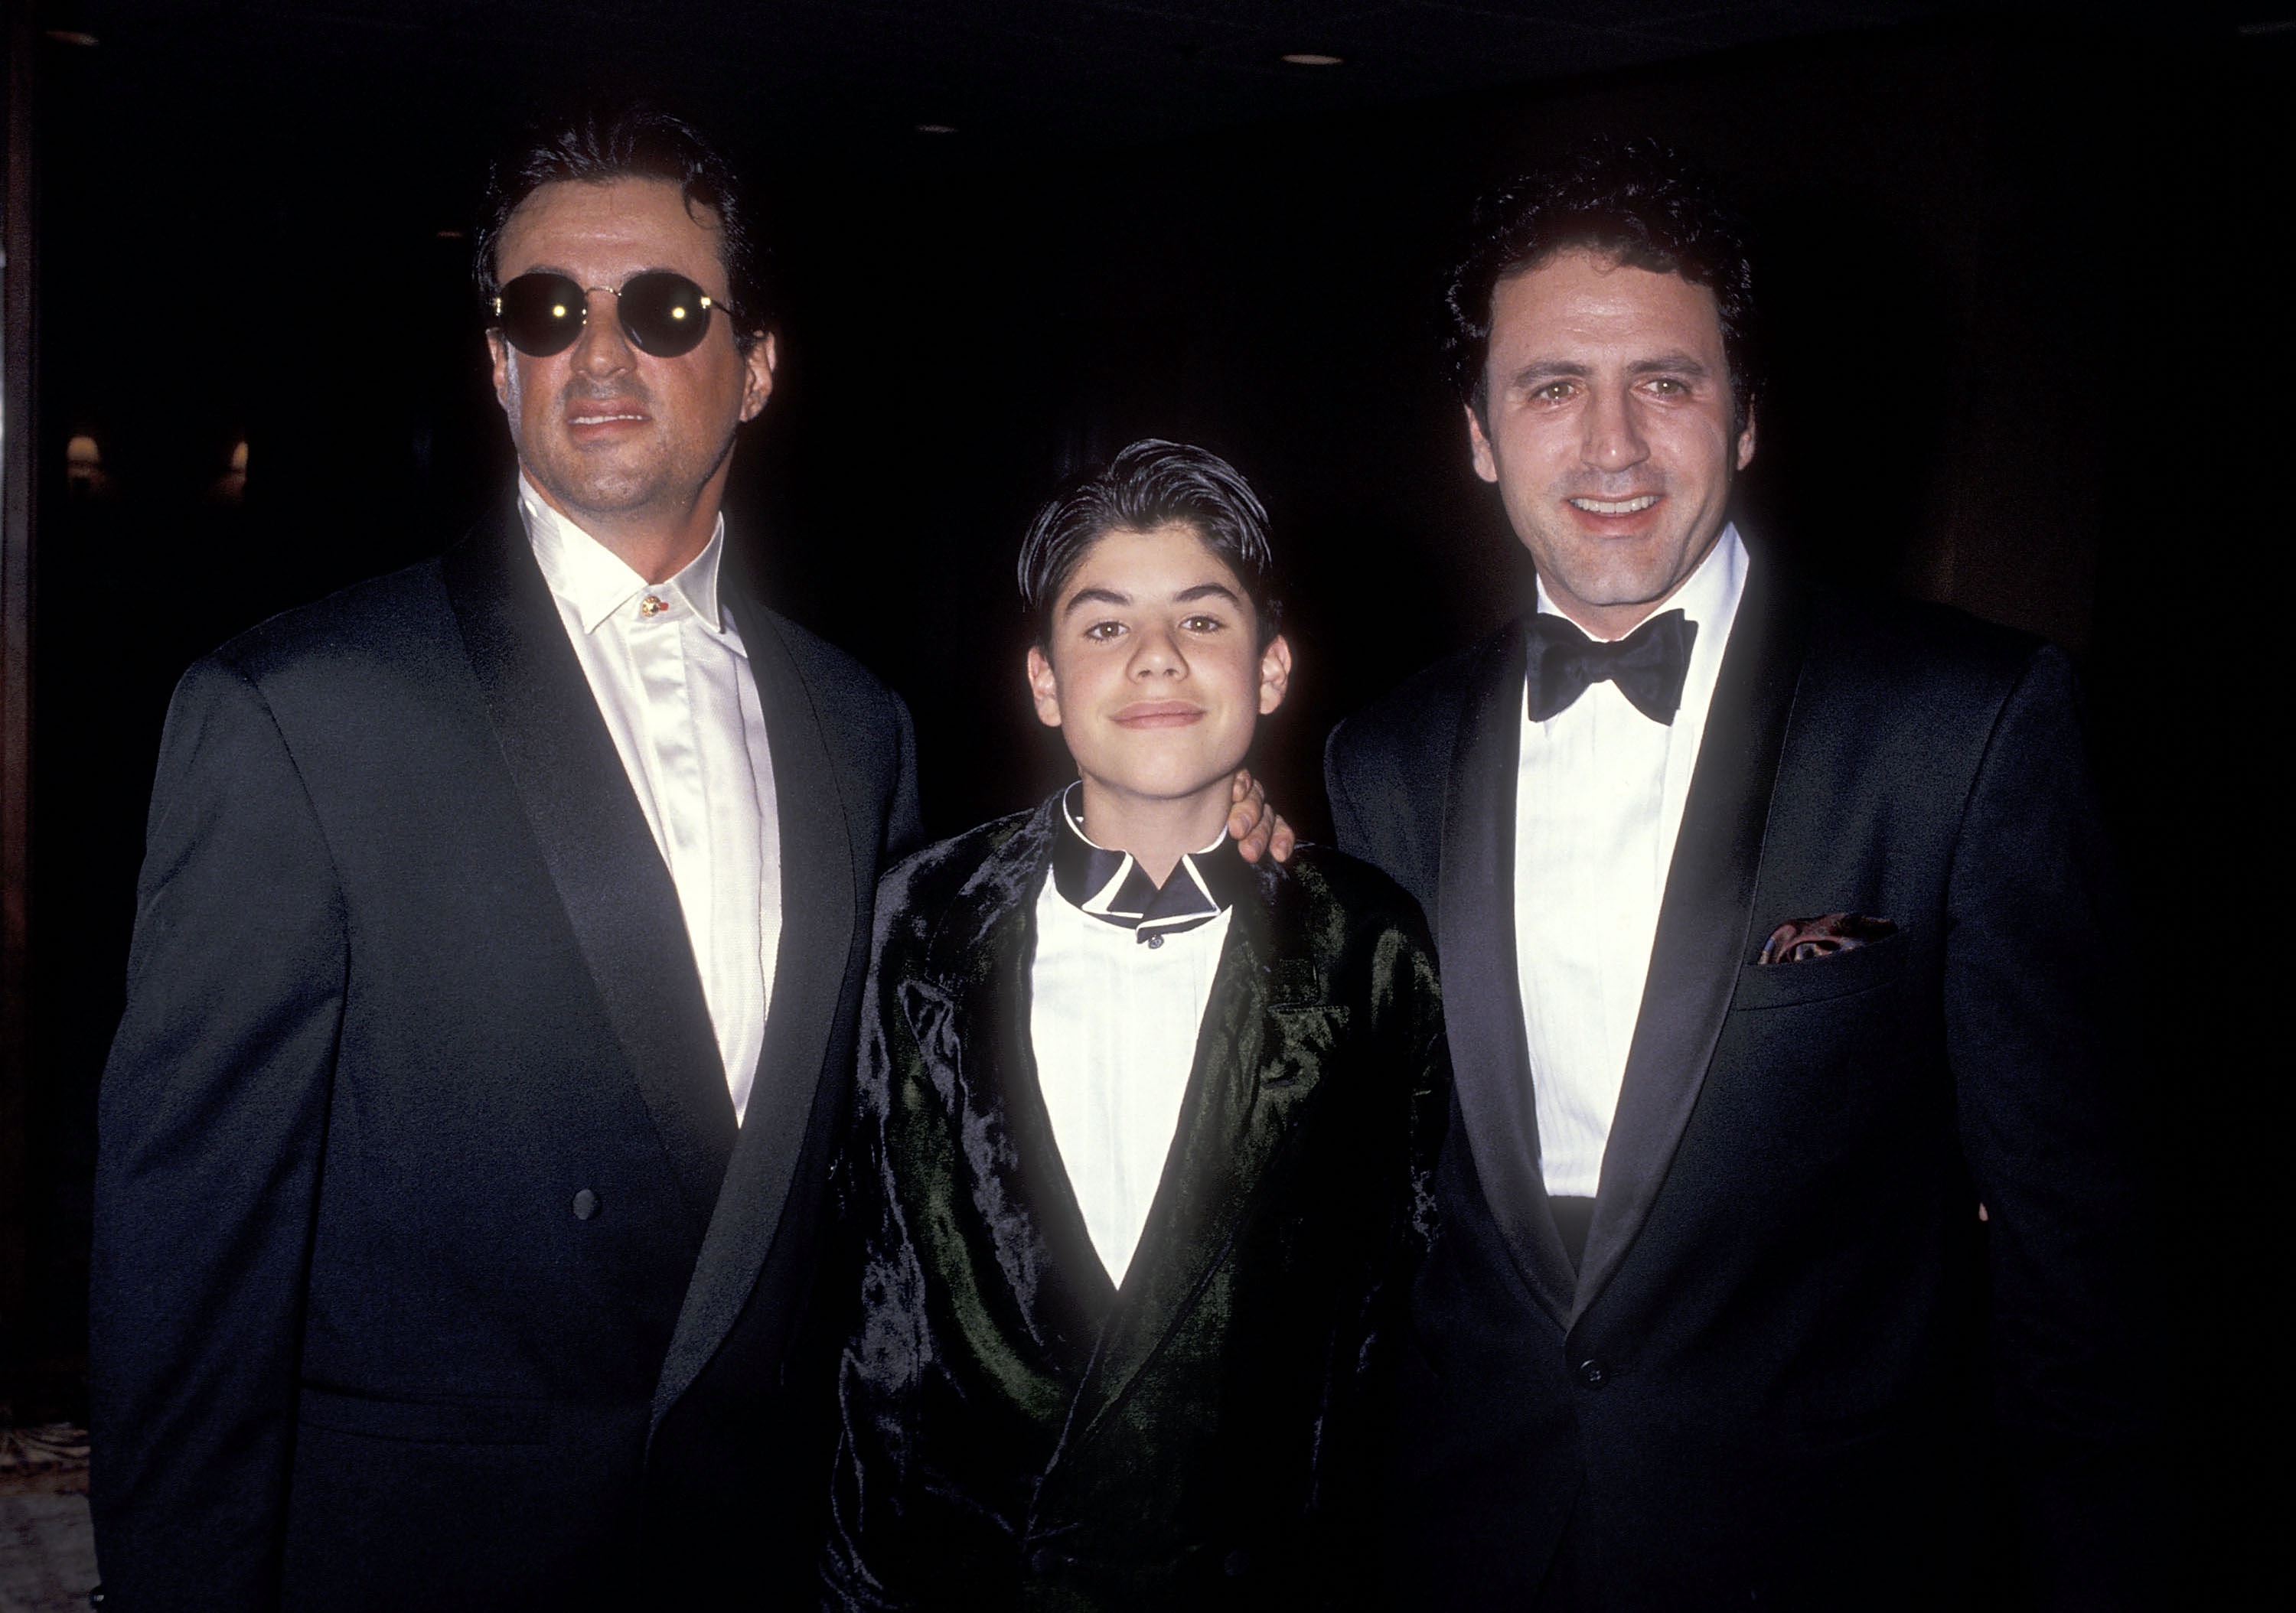 The boy, his father, and his brother at the Fifth Annual Fashion Show & Dinner Benefit Salute to Gianni Versace sponsored by the California Fashion Industry Friends of AIDS Project Los Angeles in Century City, California, on February 13, 1991 | Source: Getty Images